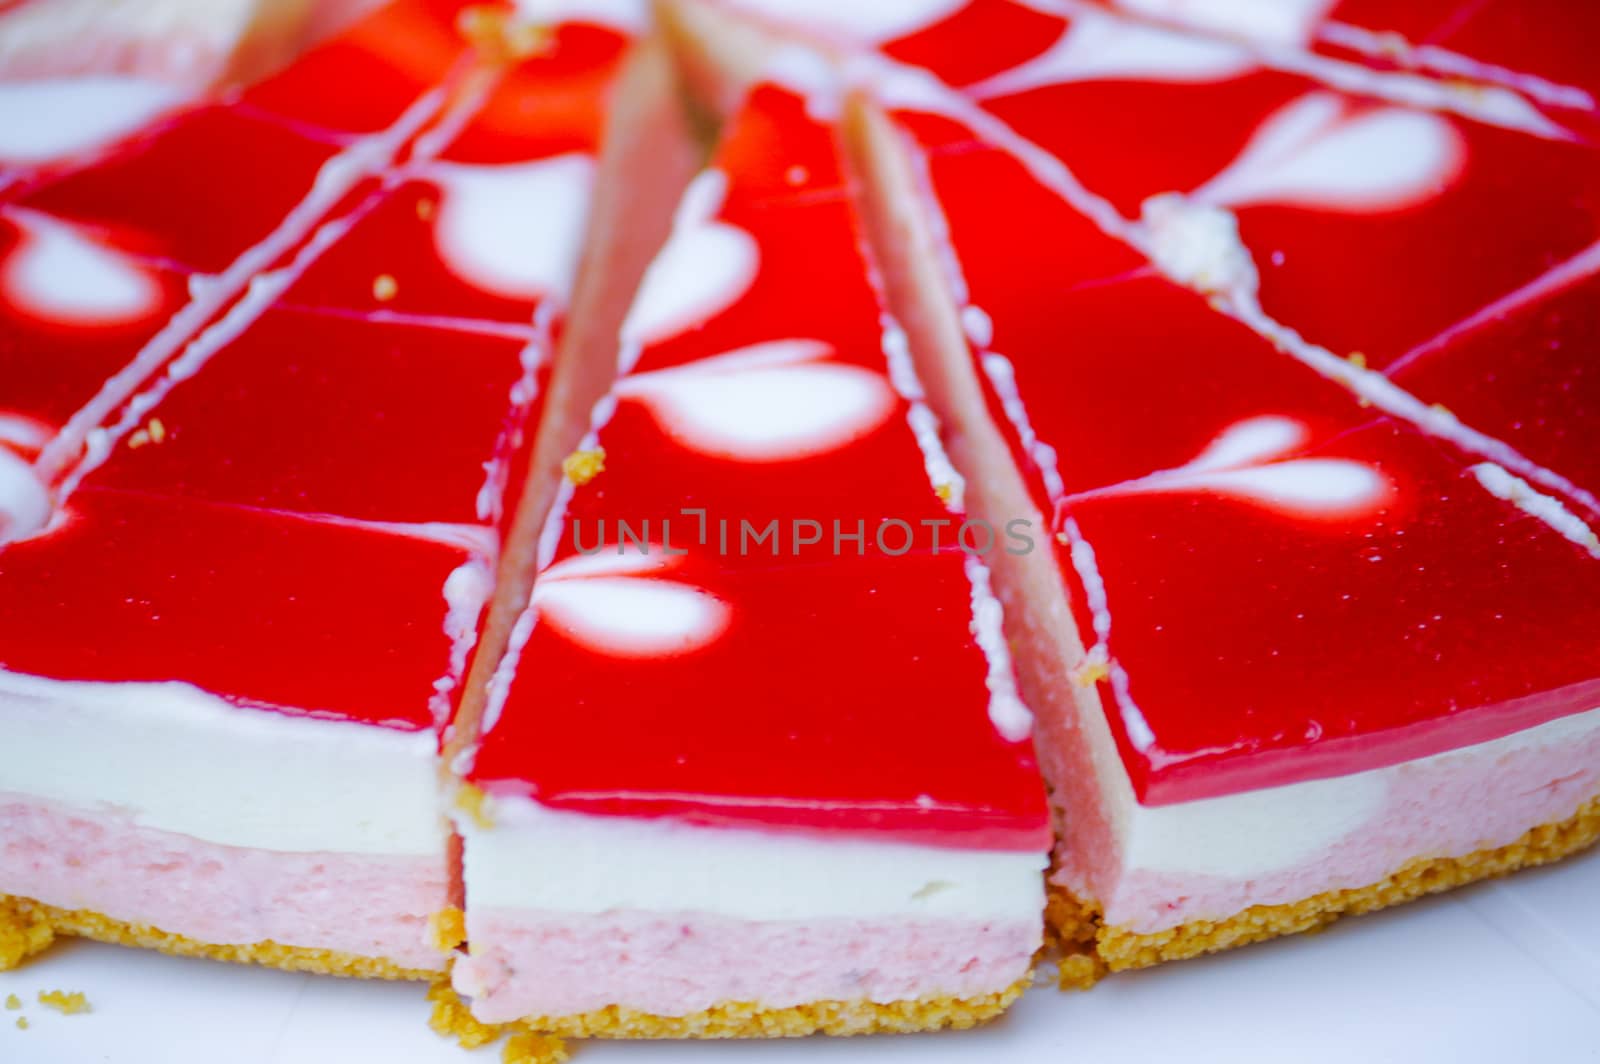 homemade cheesecake New York with Strawberries by evolutionnow